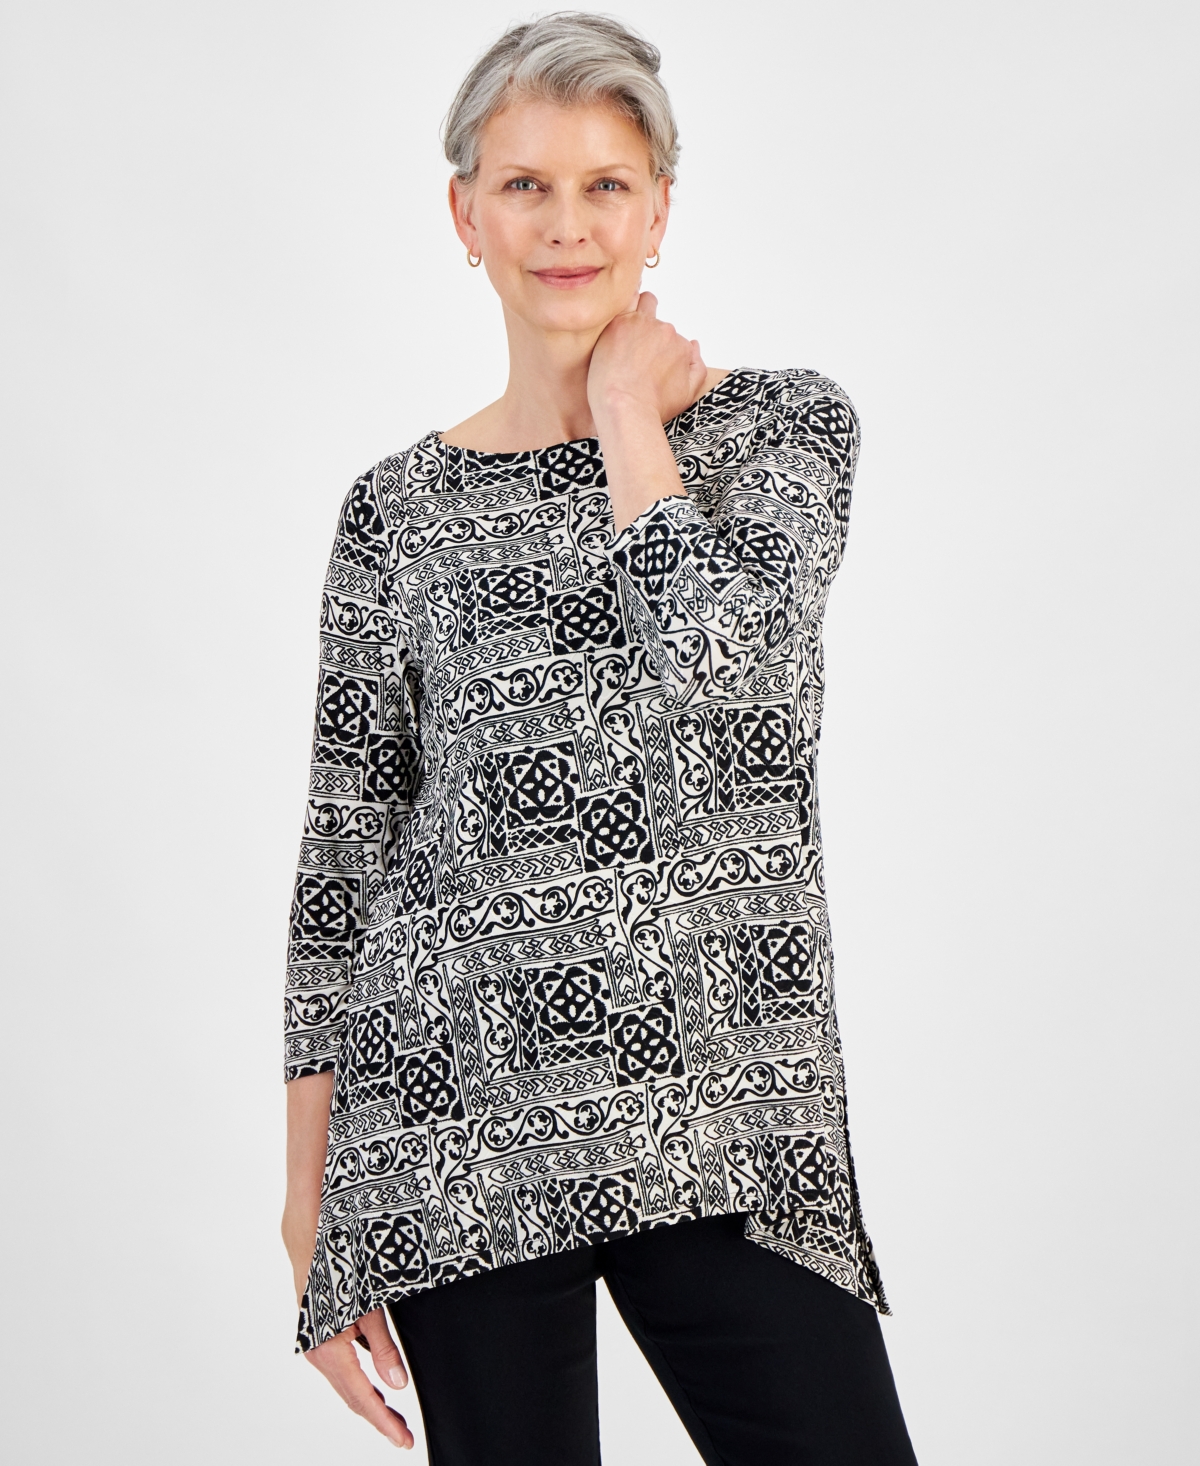 Women's 3/4 Sleeve Printed Jacquard Swing Top, Created for Macy's - Neo Natural Combo